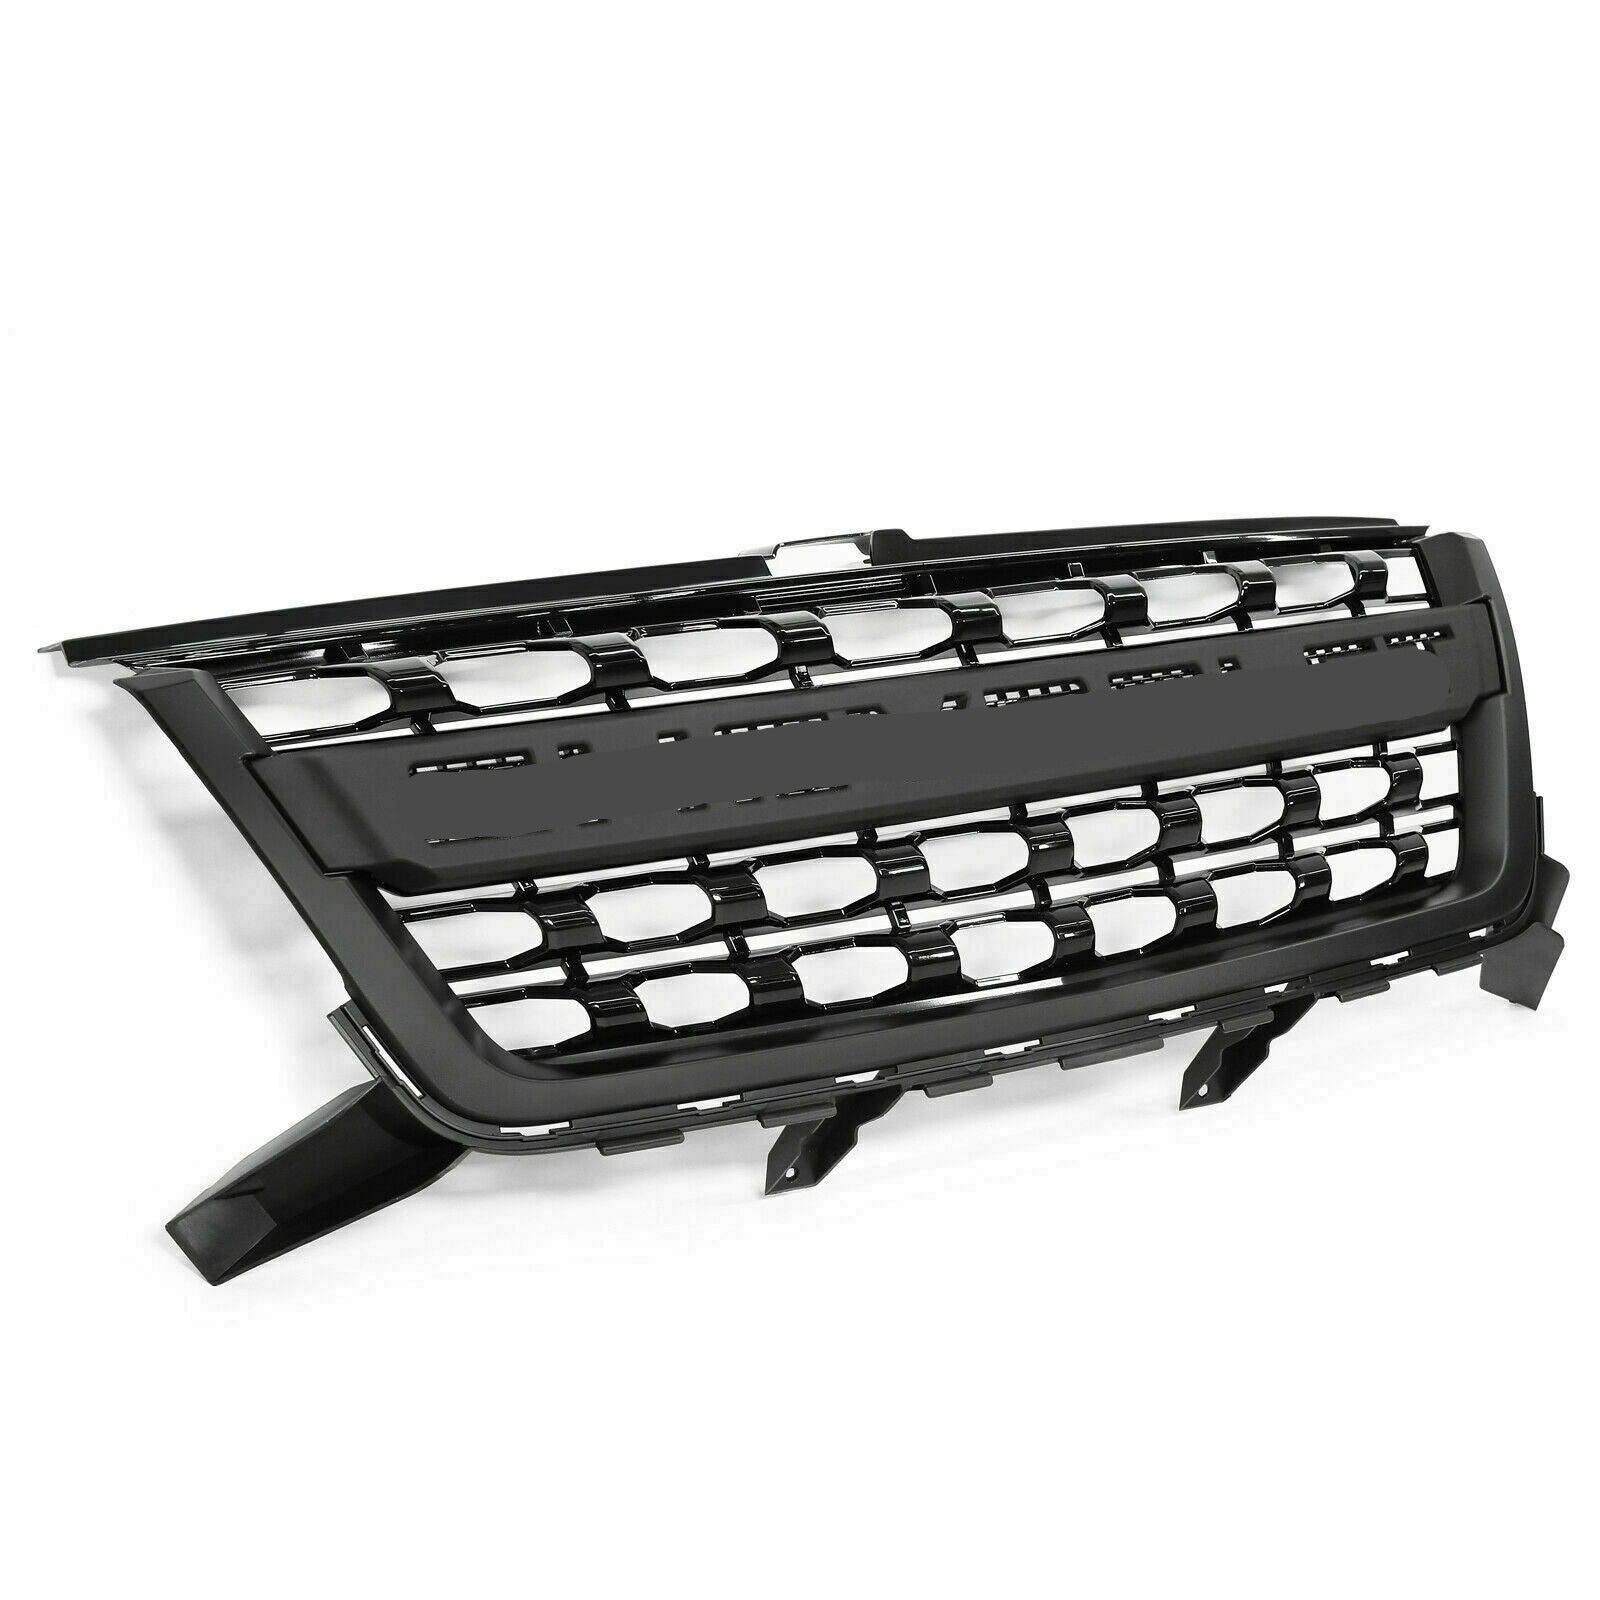 Front Grill Aftermark Goodmatchup Colorado – For 2019 2016 Chevy 2020 2018 2017 2015